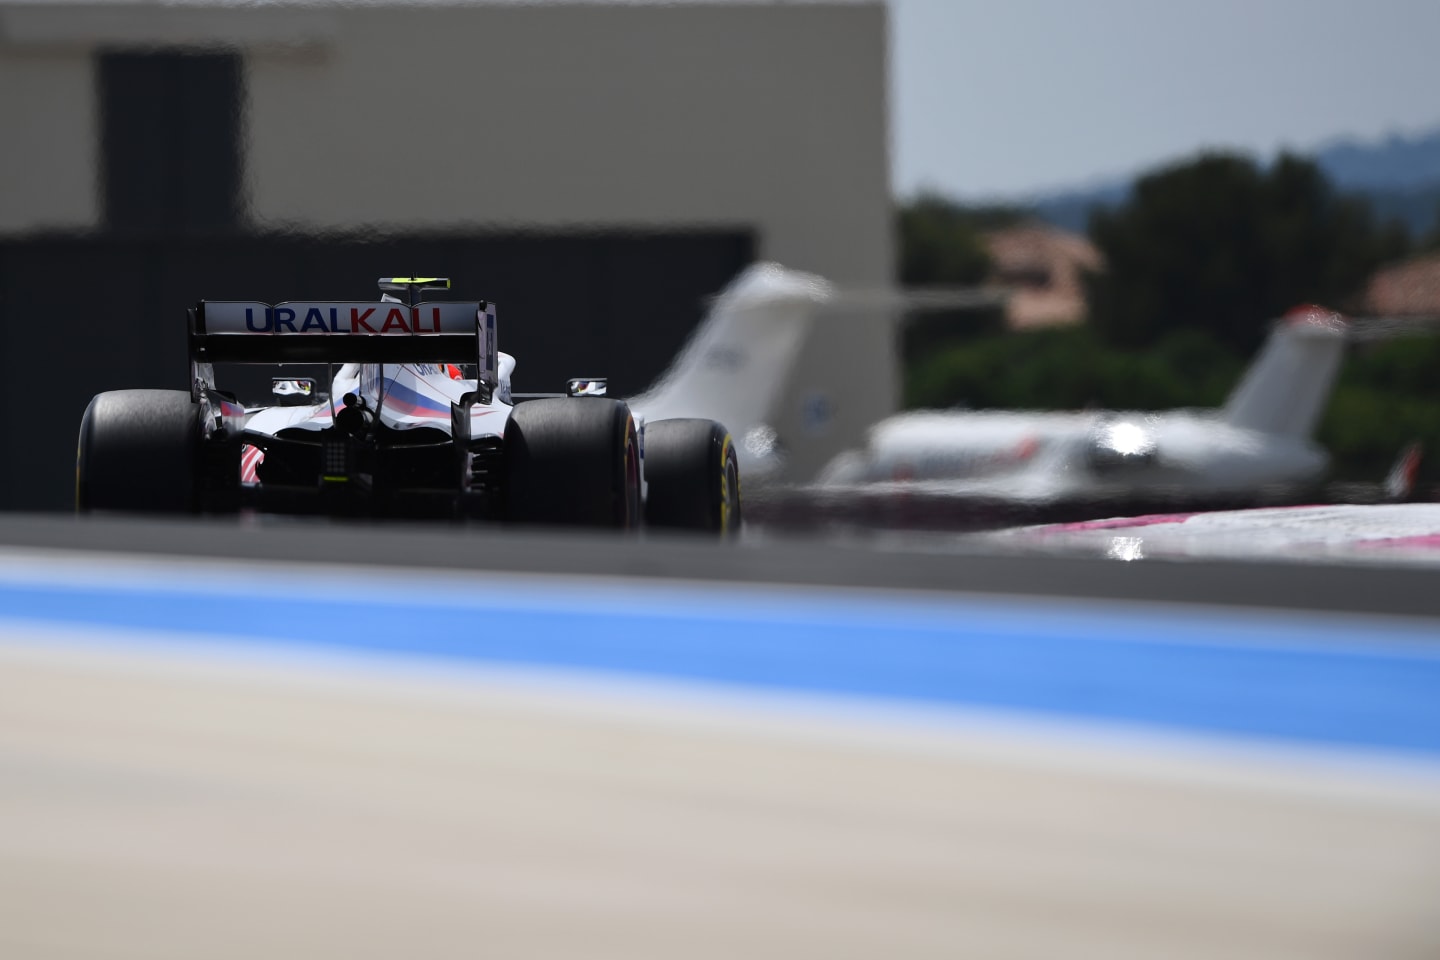 LE CASTELLET, FRANCE - JUNE 18: Mick Schumacher of Germany driving the (47) Haas F1 Team VF-21 Ferrari on track during practice ahead of the F1 Grand Prix of France at Circuit Paul Ricard on June 18, 2021 in Le Castellet, France. (Photo by Rudy Carezzevoli/Getty Images)